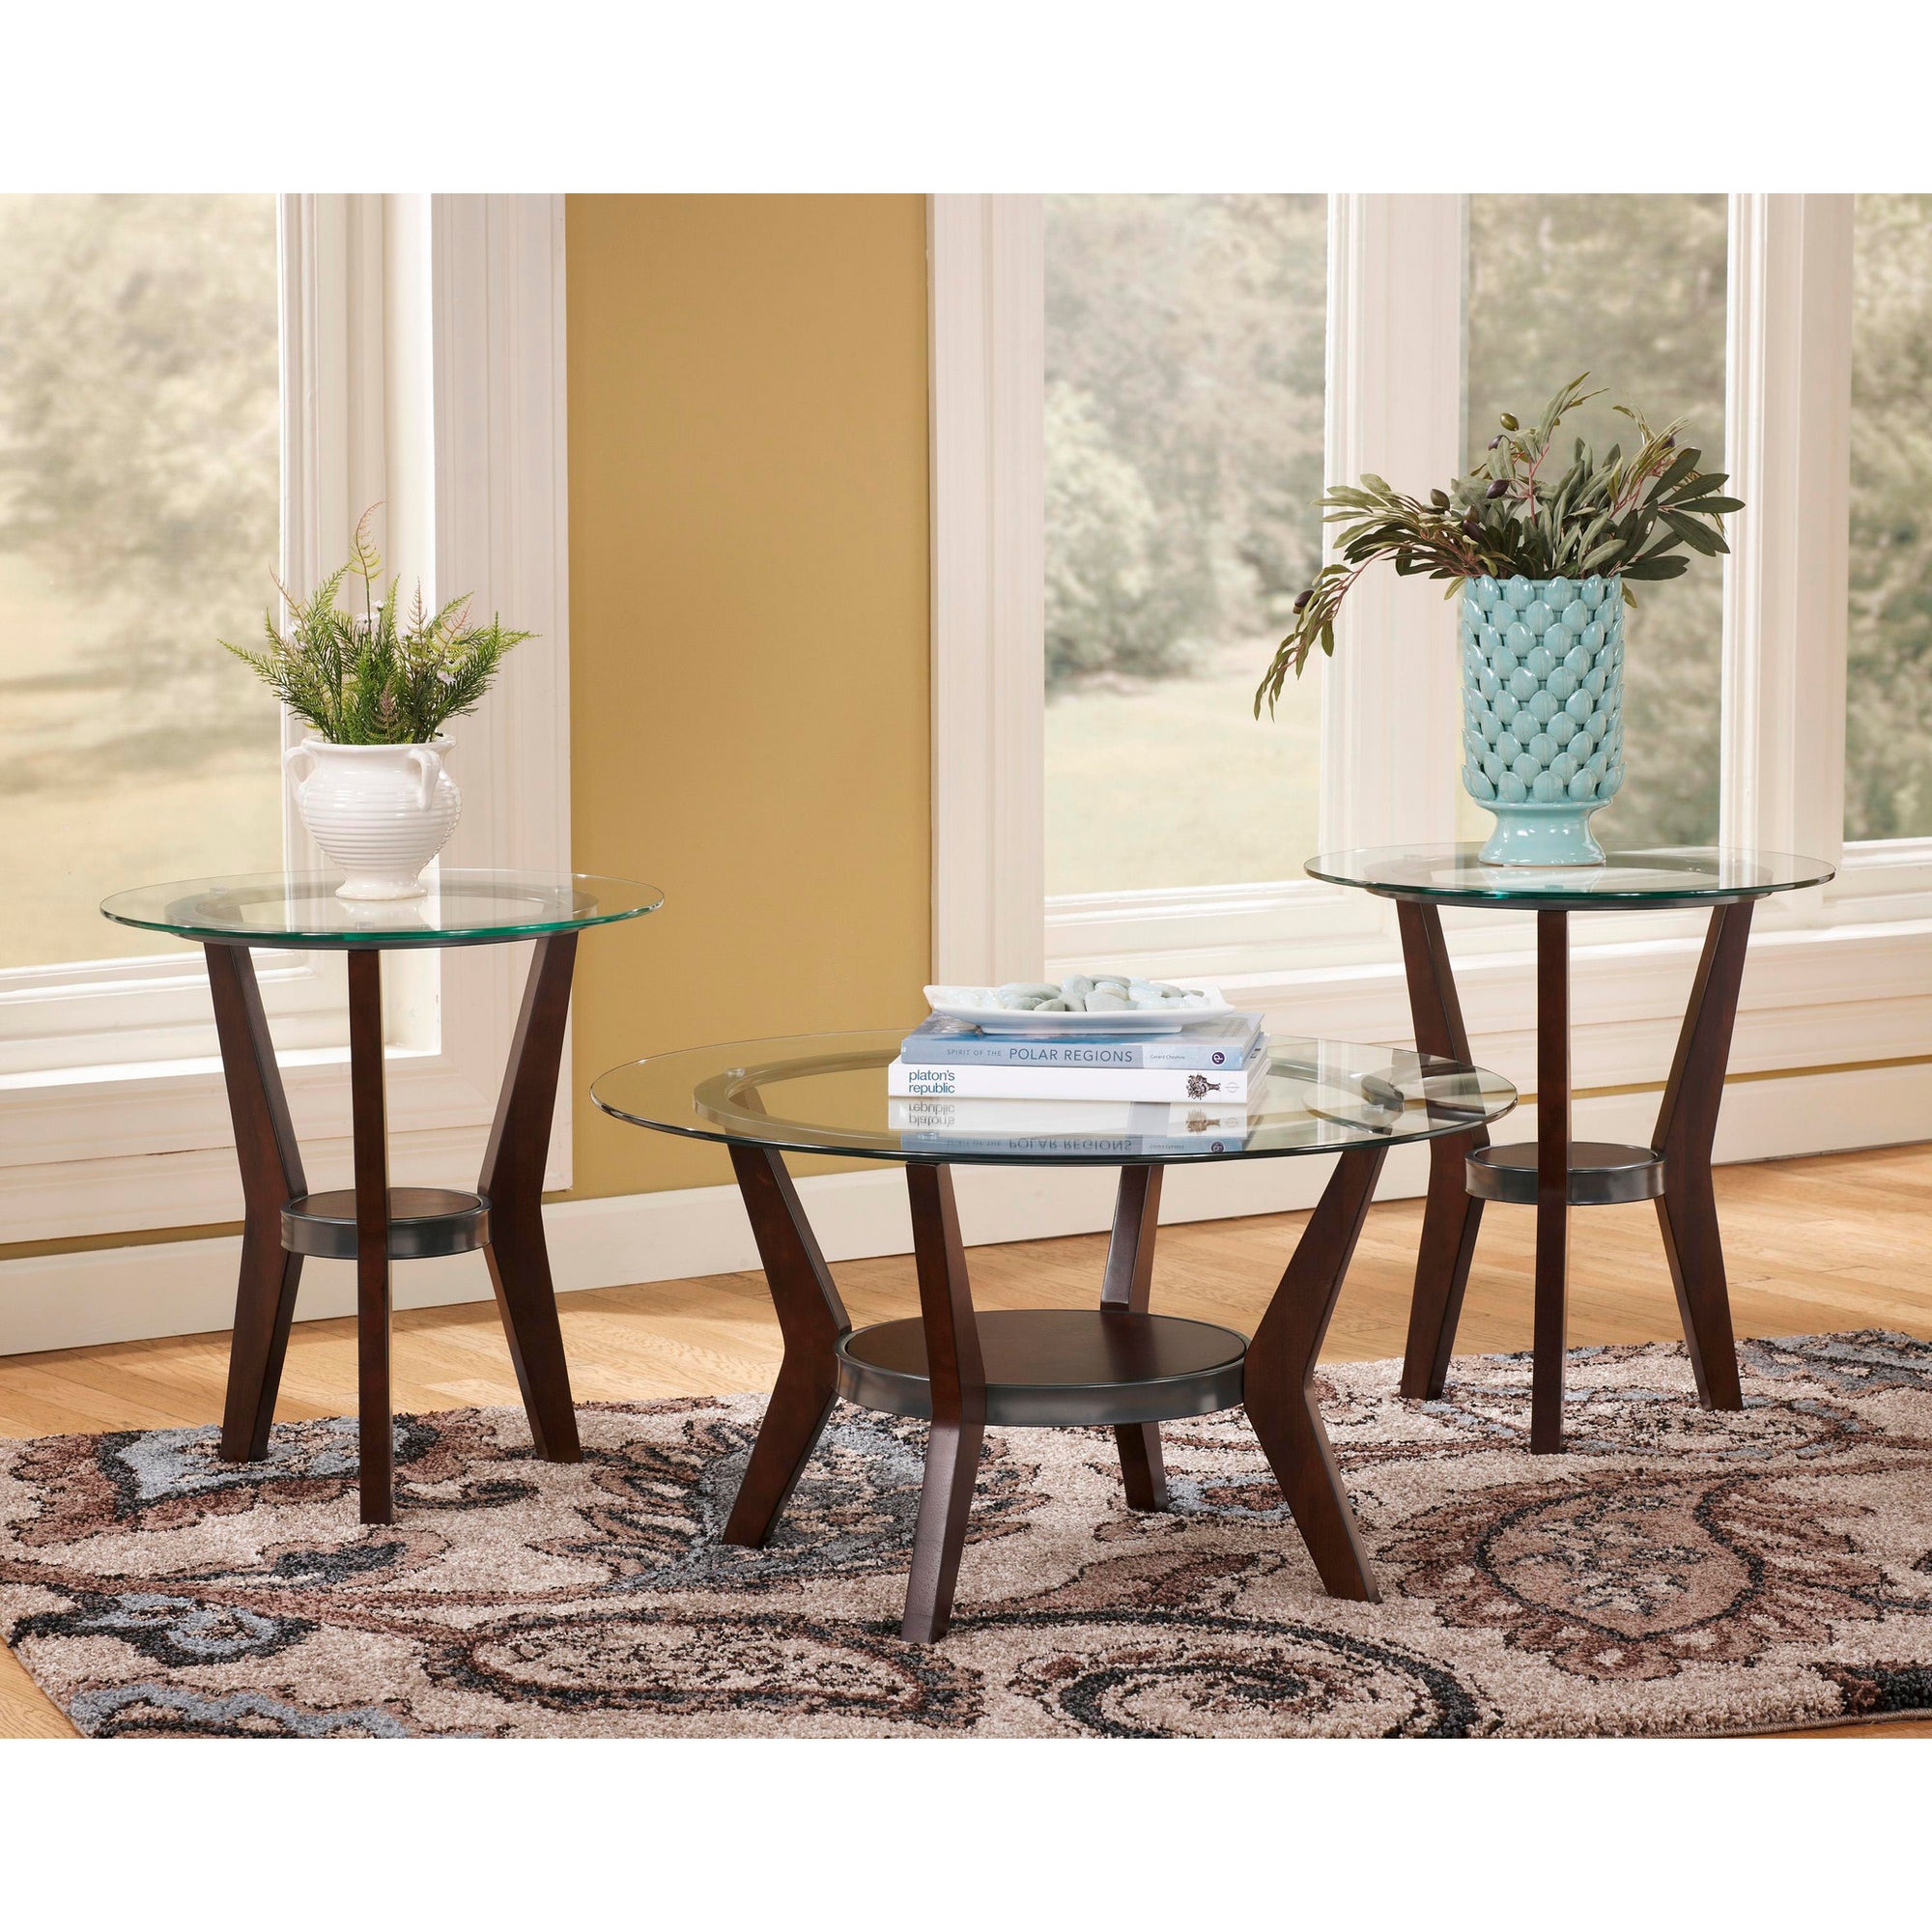 Fantell Table Trio (Set of 3)